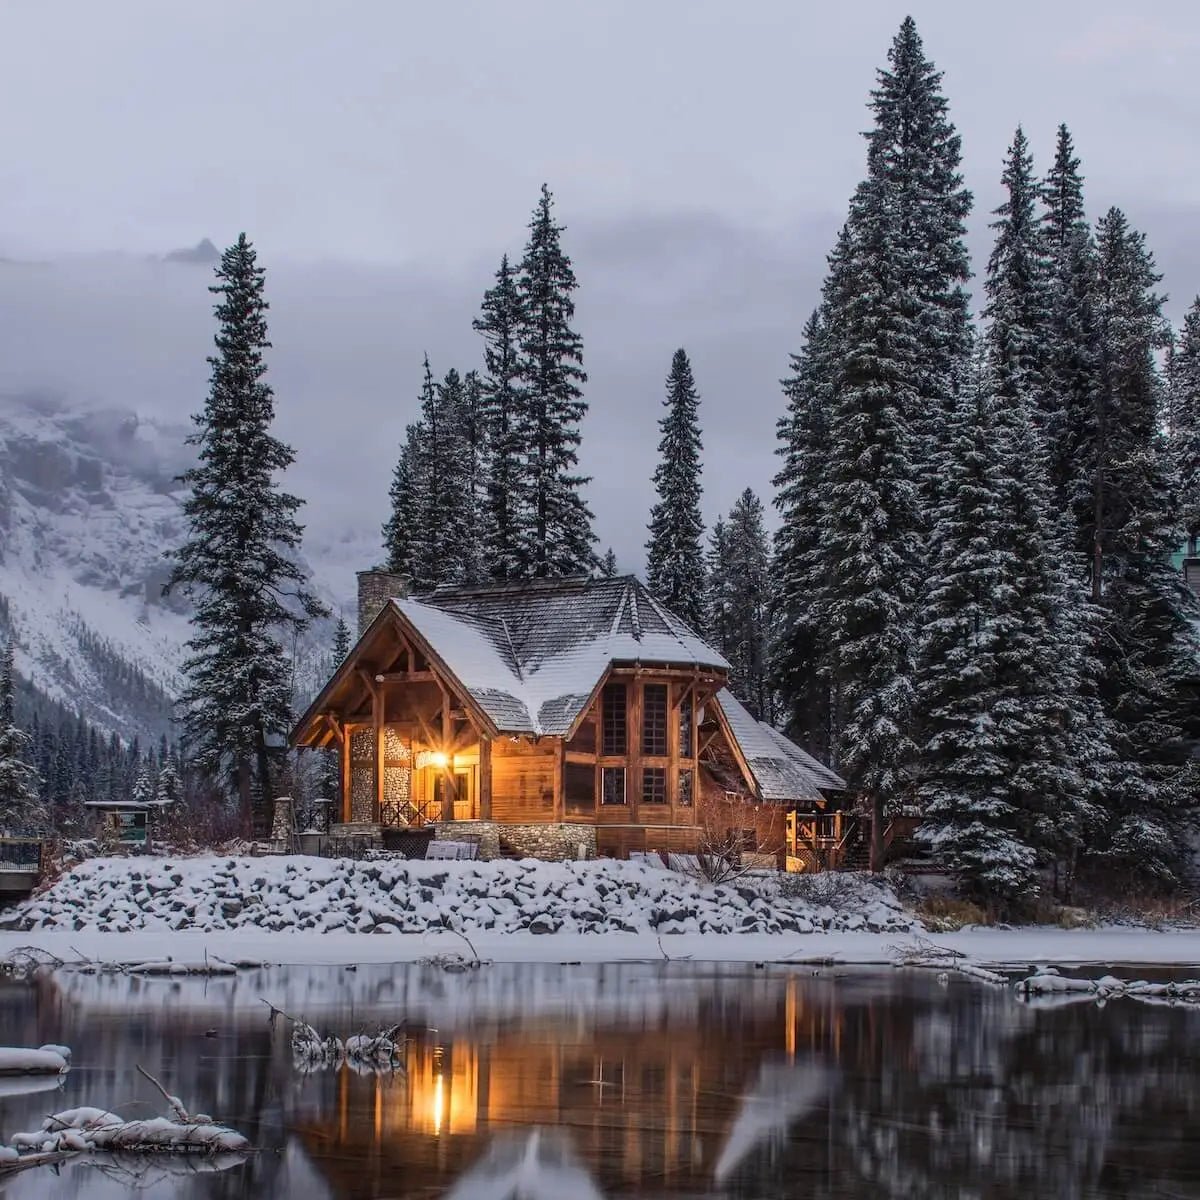 A cosy log cabin in amongst snowy mountains, a lake and snow tipped fir trees.